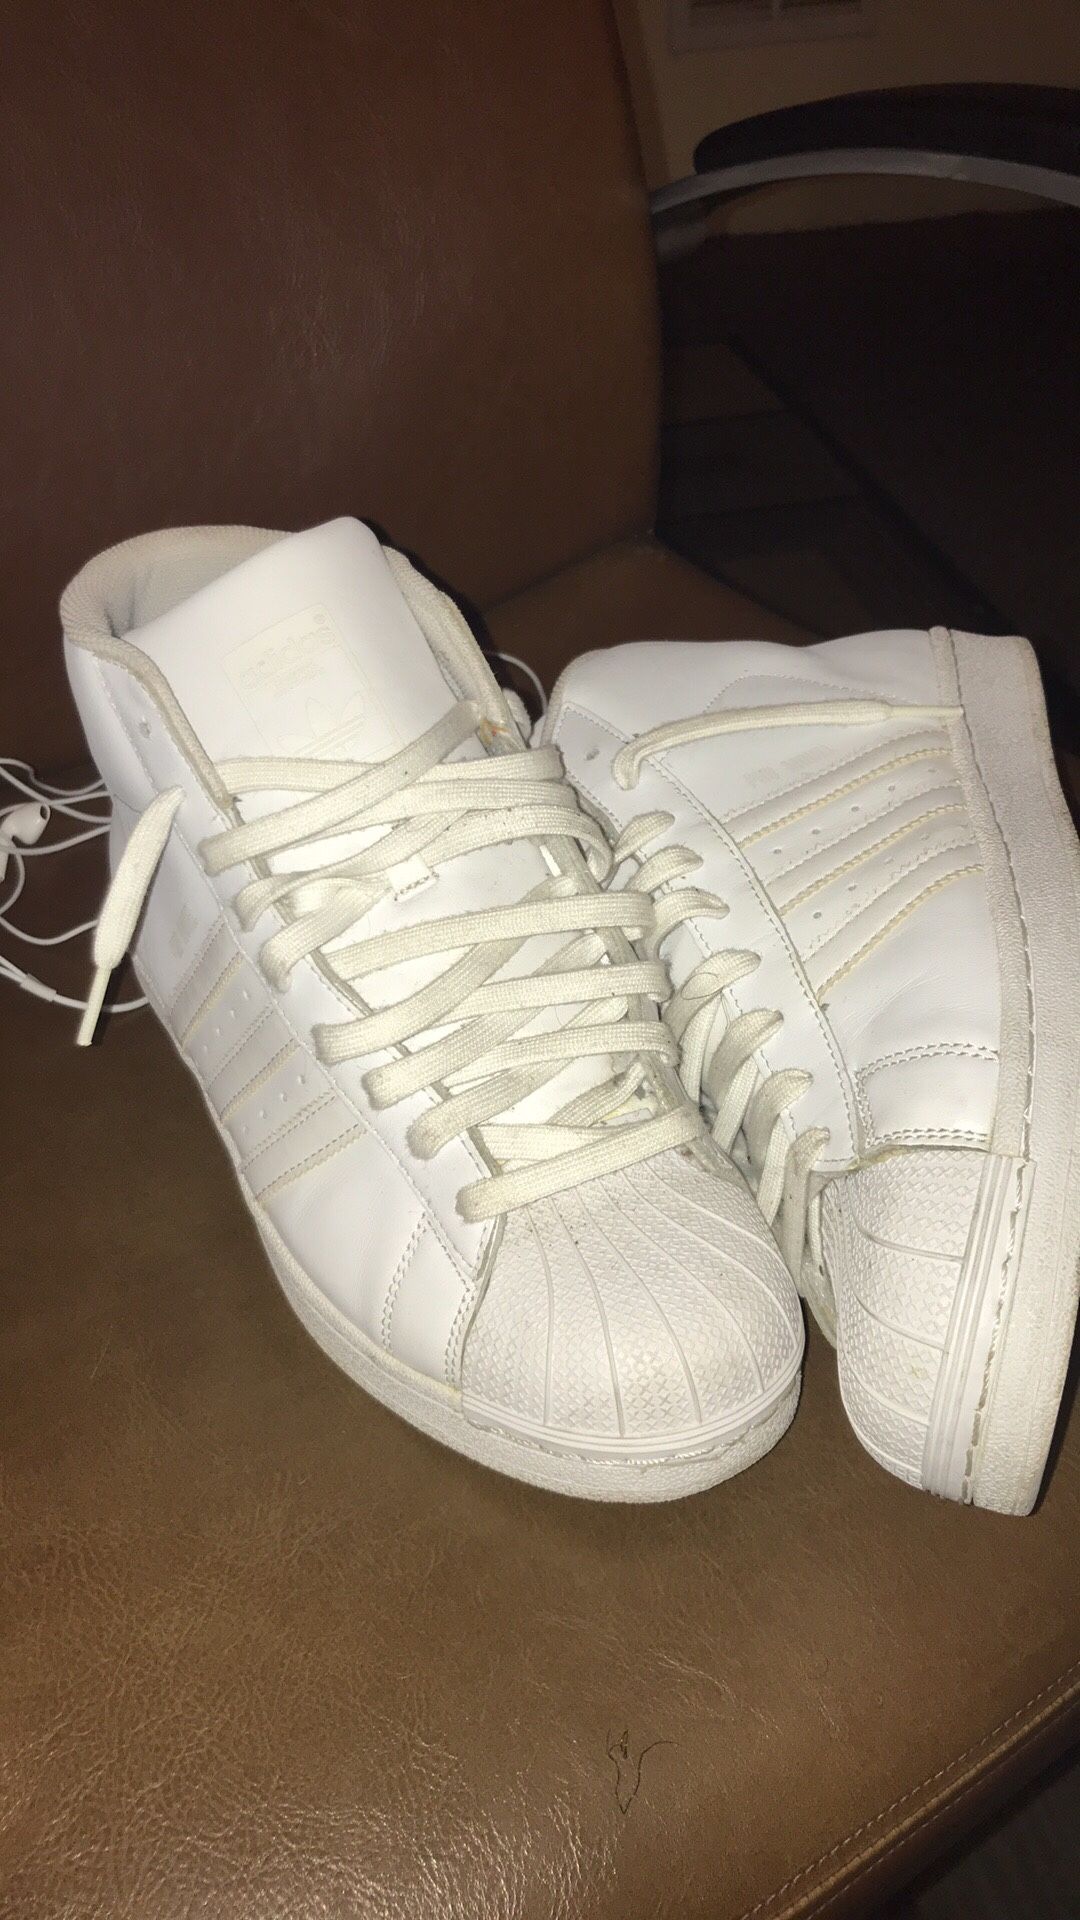 All white adidas, Timberland work boots, and custom made never worn levi shorts